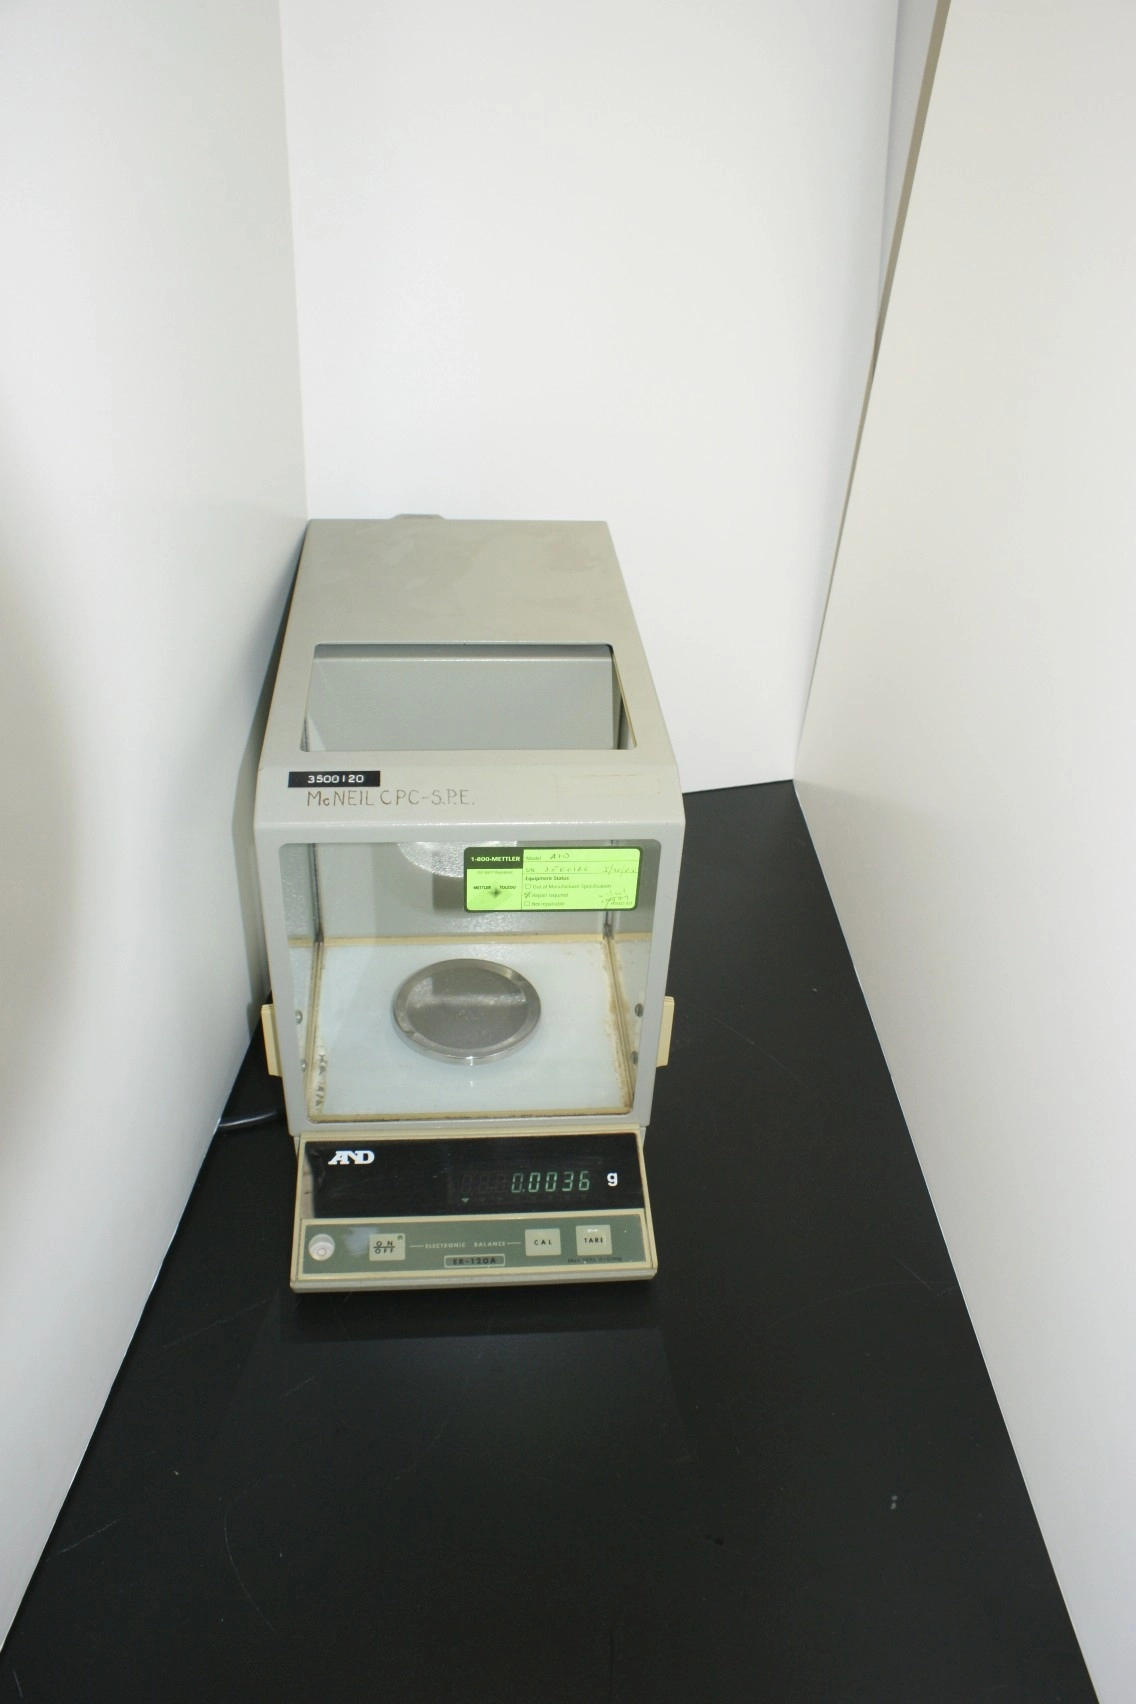 A&amp;D Weighing ER-120A A&amp;D ER-120A A&amp;D ER120A AND ER-120A Analytical Balance used tested and working ,120 gram x 0.0001 gram